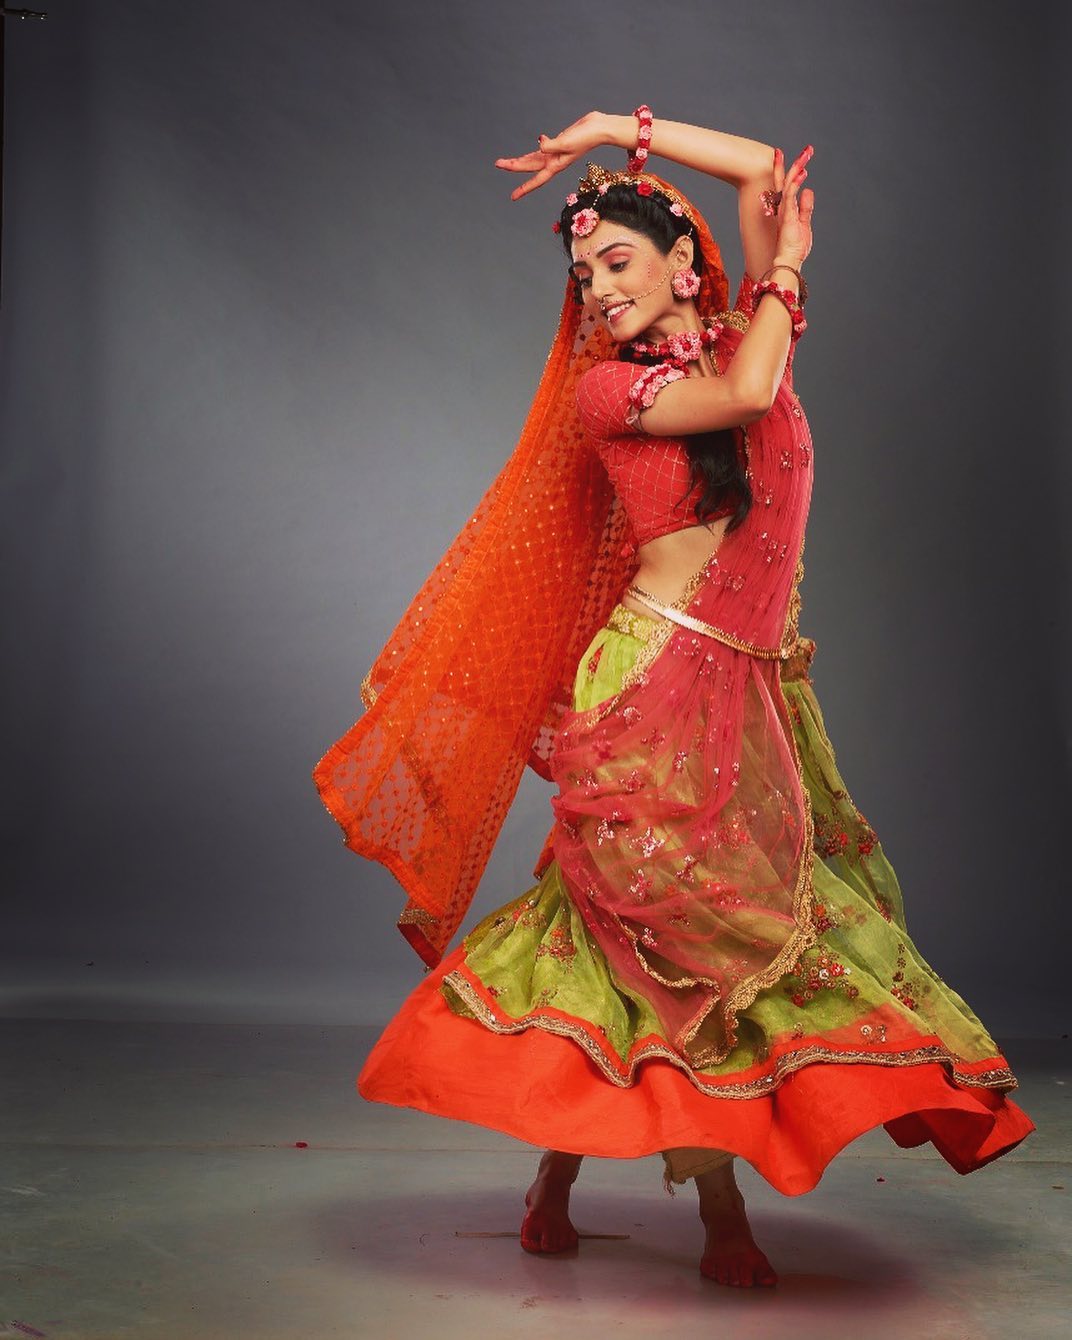 Mallika Singh - Specialities and talents